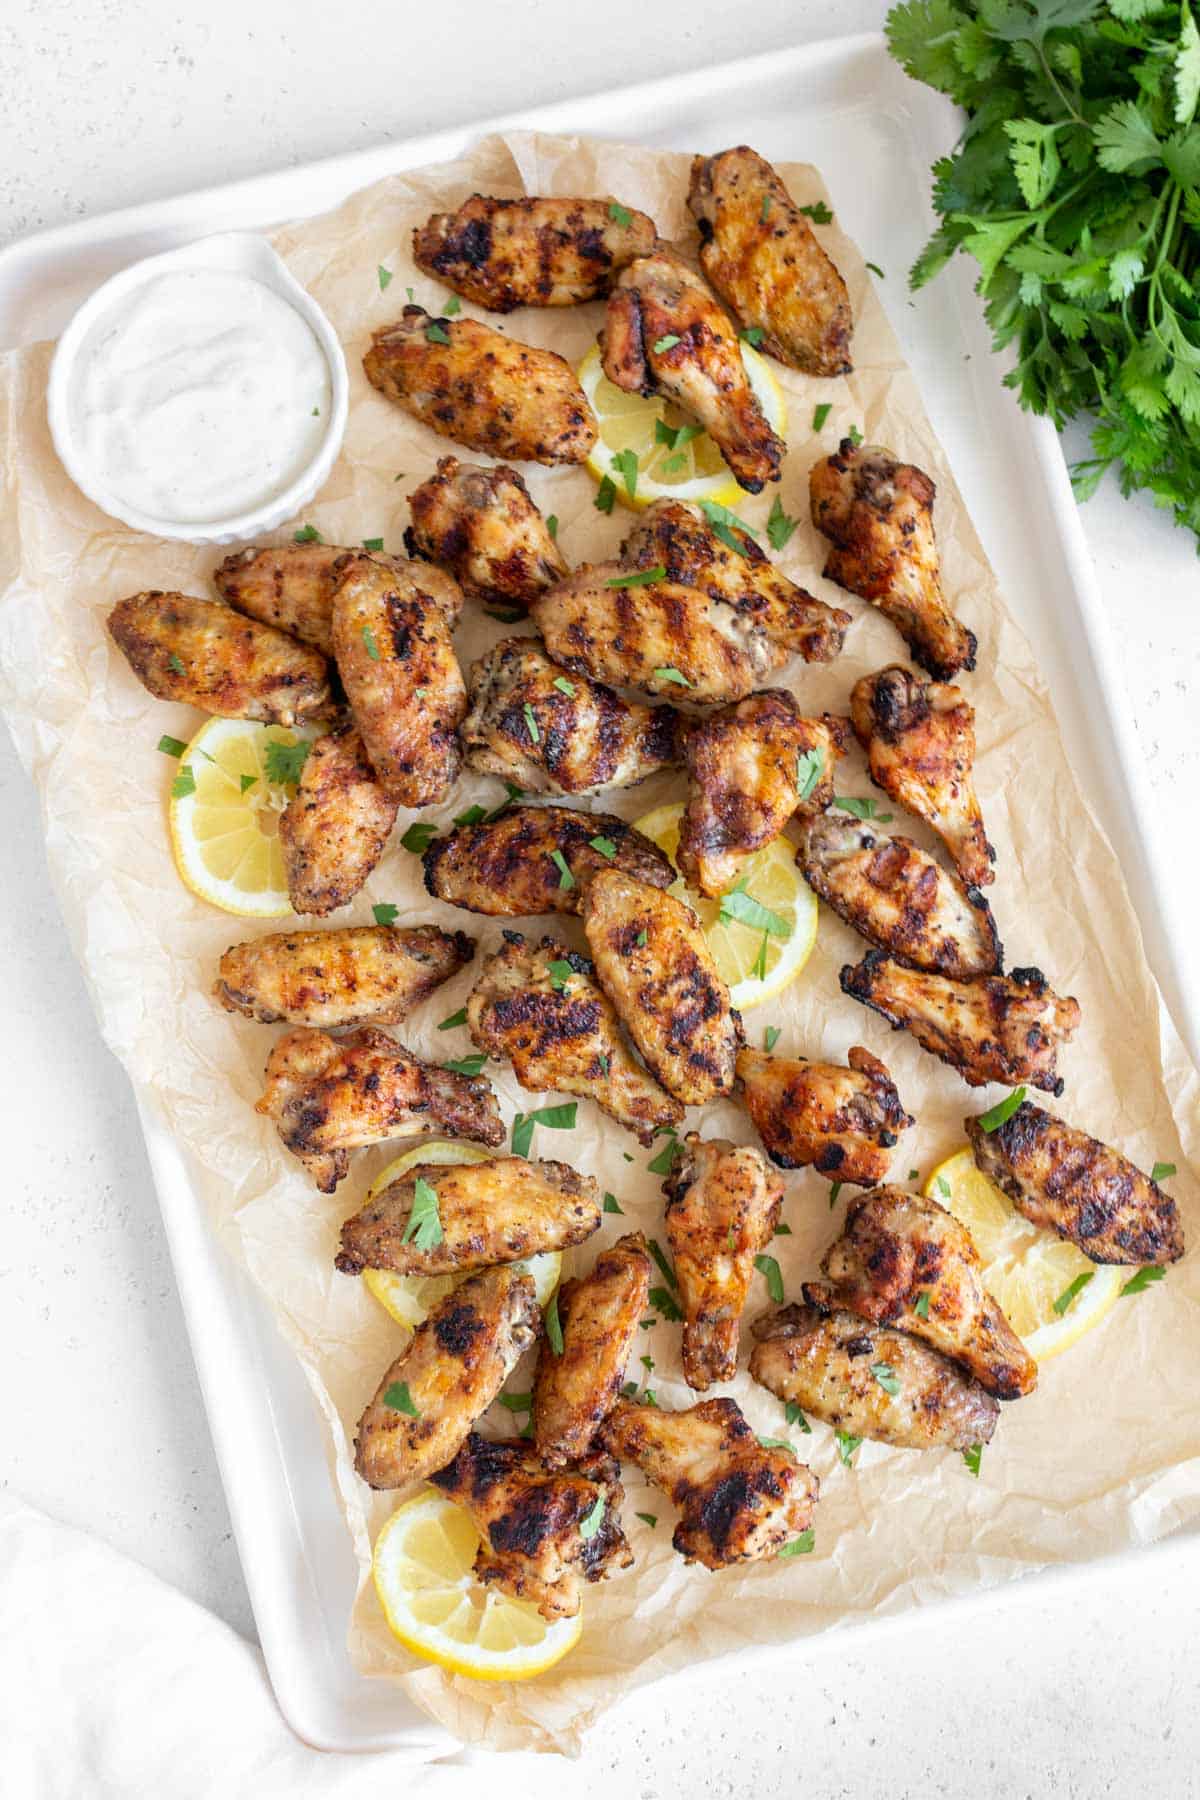 Overhead view of grilled chicken wings on a sheet pan with cilantro and lemon slices as garnish.